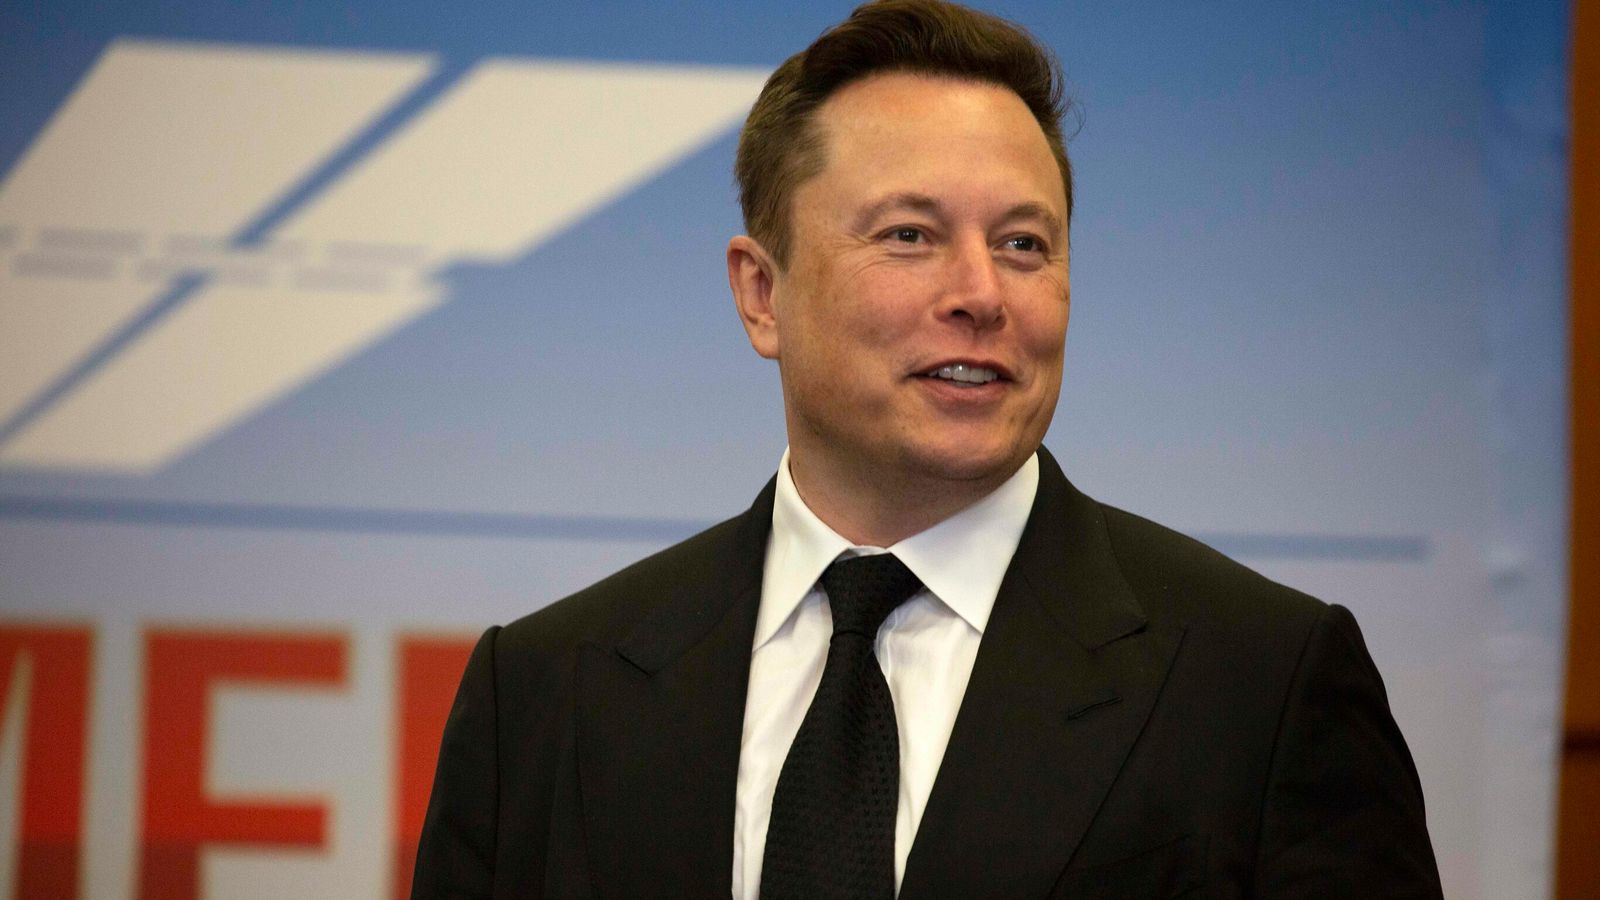 Here's why Elon Musk canceled his Apple News subscription